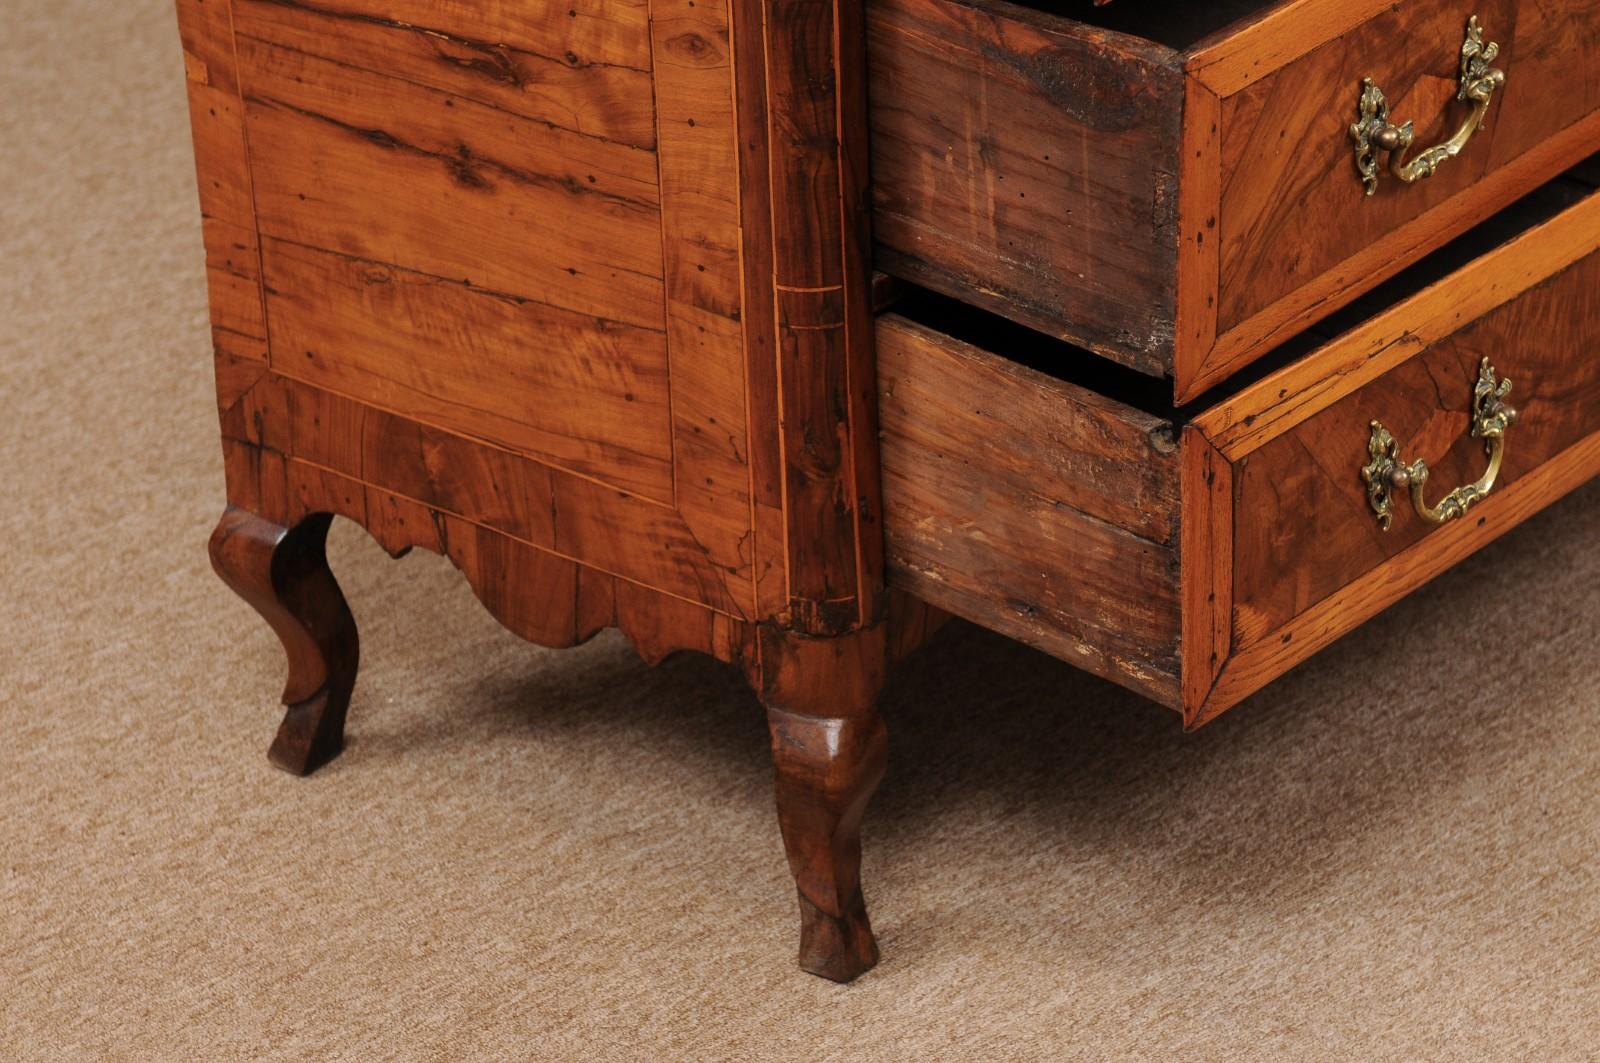 18th Century Italian 3-Drawer Commode in Olivewood with Cabriole Legs For Sale 3